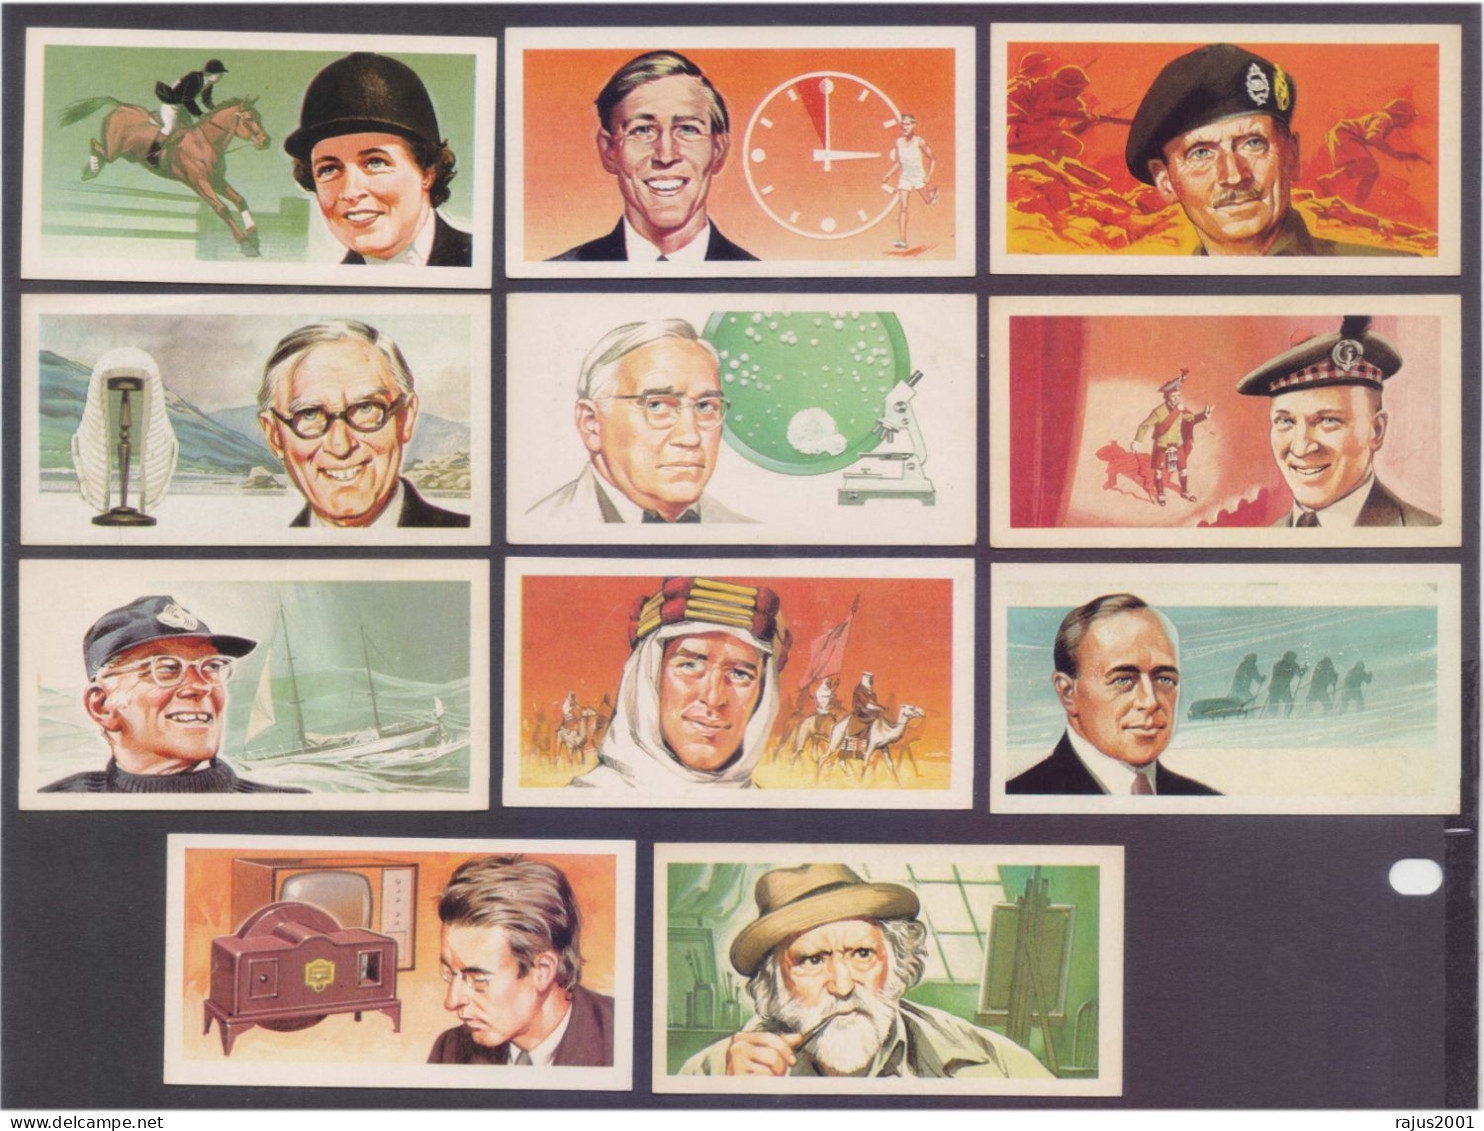 Complete Set Of 50 Most Famous Men & Women Personalities, Famous People, Originally Issued With BROOKE BOND TEA Card - Franc-Maçonnerie